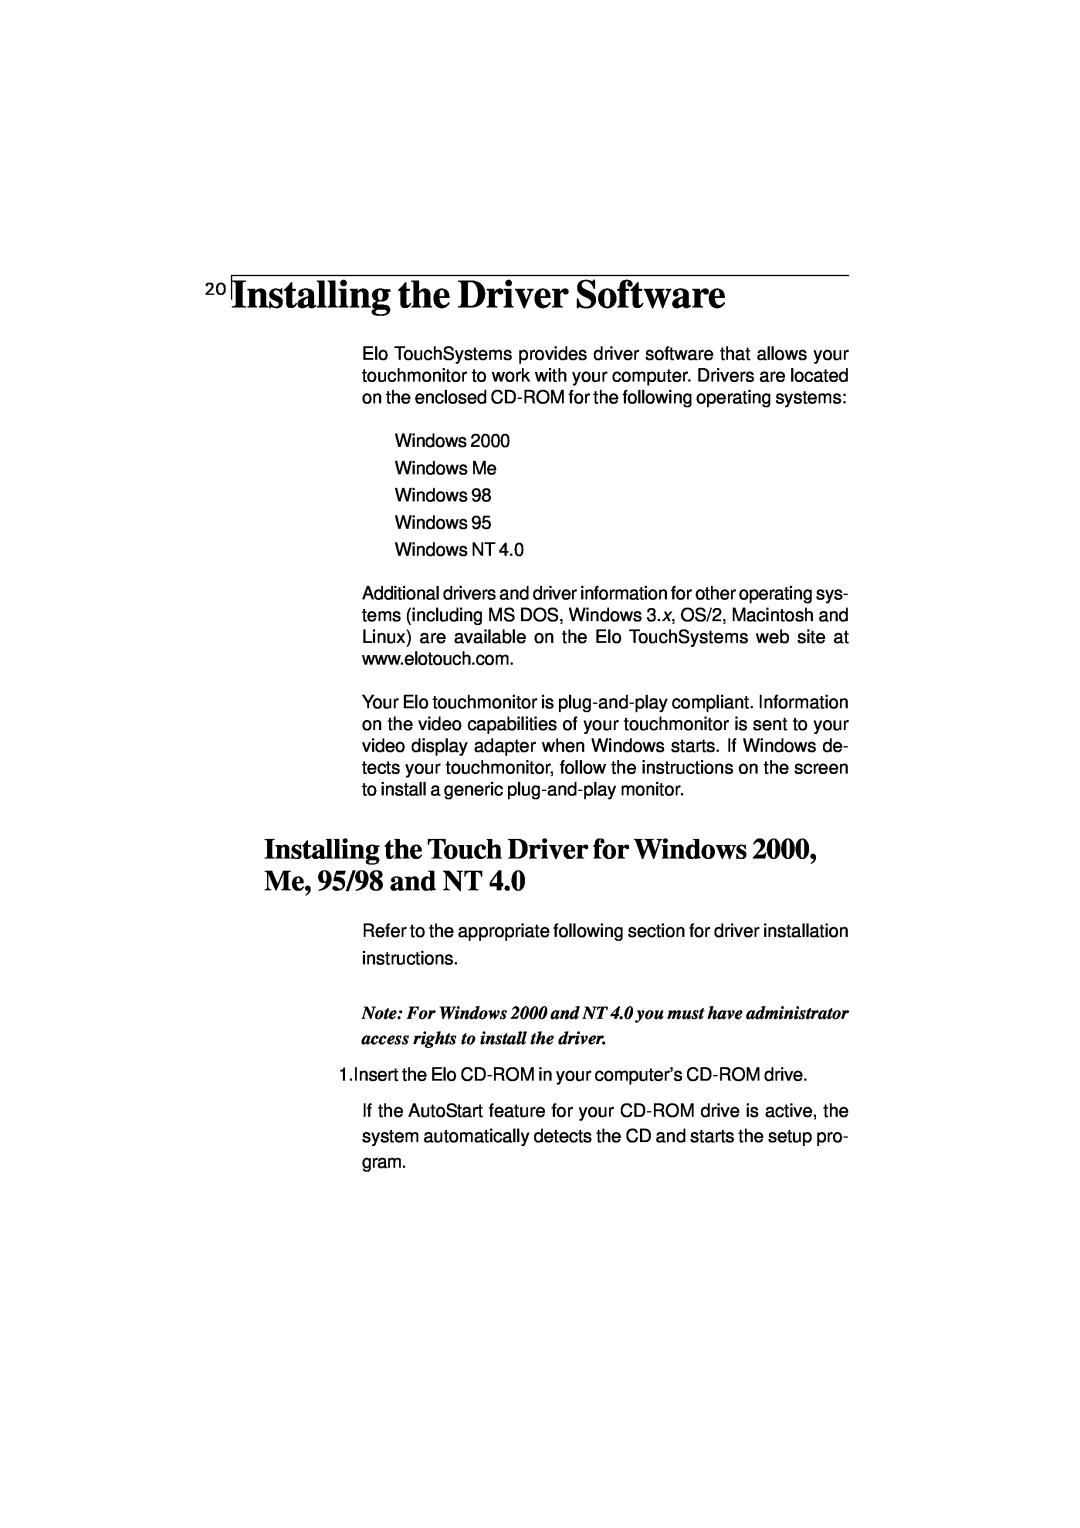 Elo TouchSystems 1225L Installing the Driver Software, Installing the Touch Driver for Windows 2000, Me, 95/98 and NT 